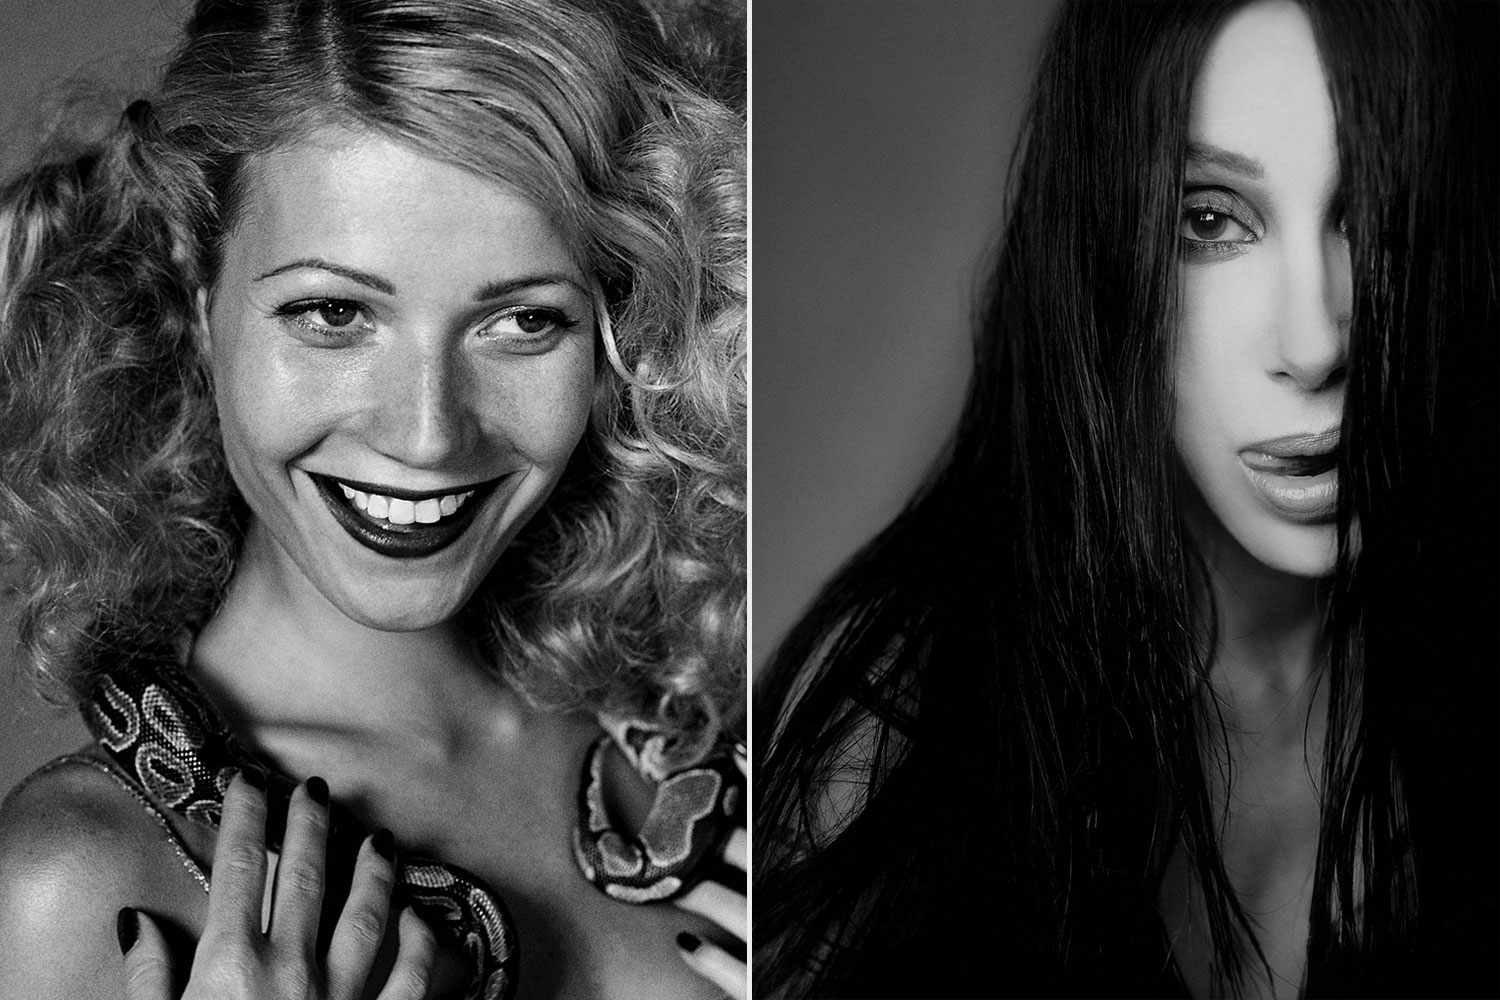 Gwyneth Paltrow Posing With a Snake to Cher Poking Her Tongue Out: Stories Behind Iconic Celeb Photos (Exclusive)